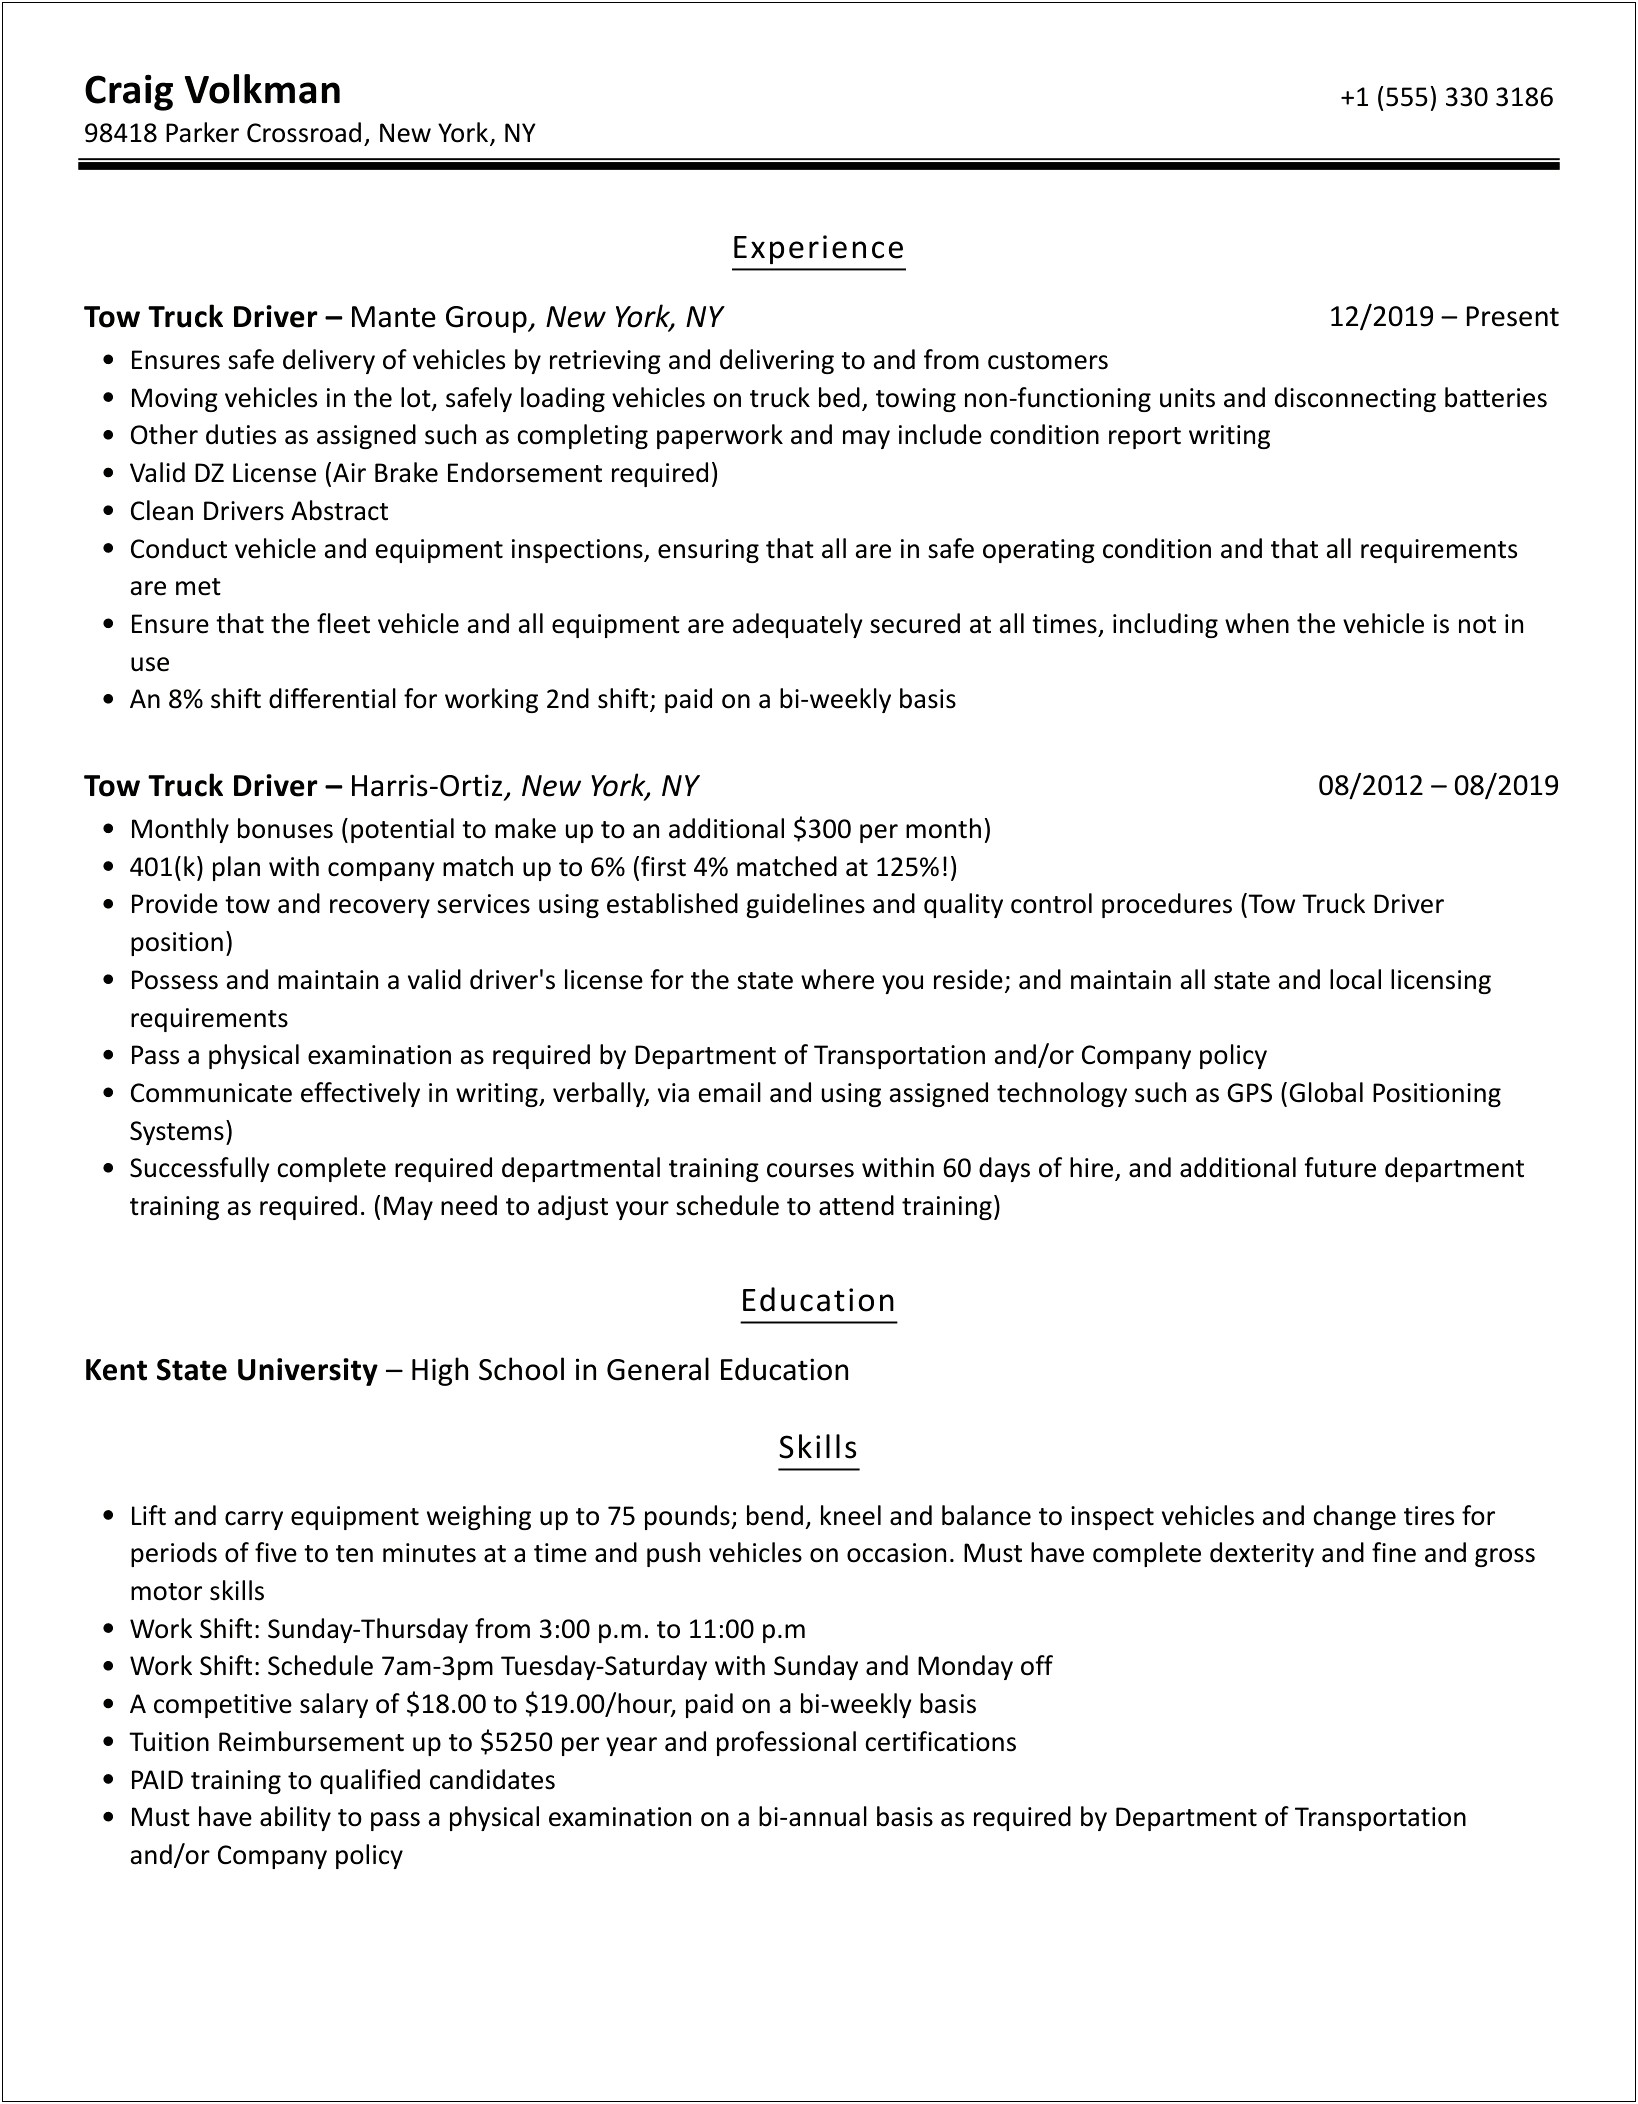 Sample Resume For Tow Truck Driver